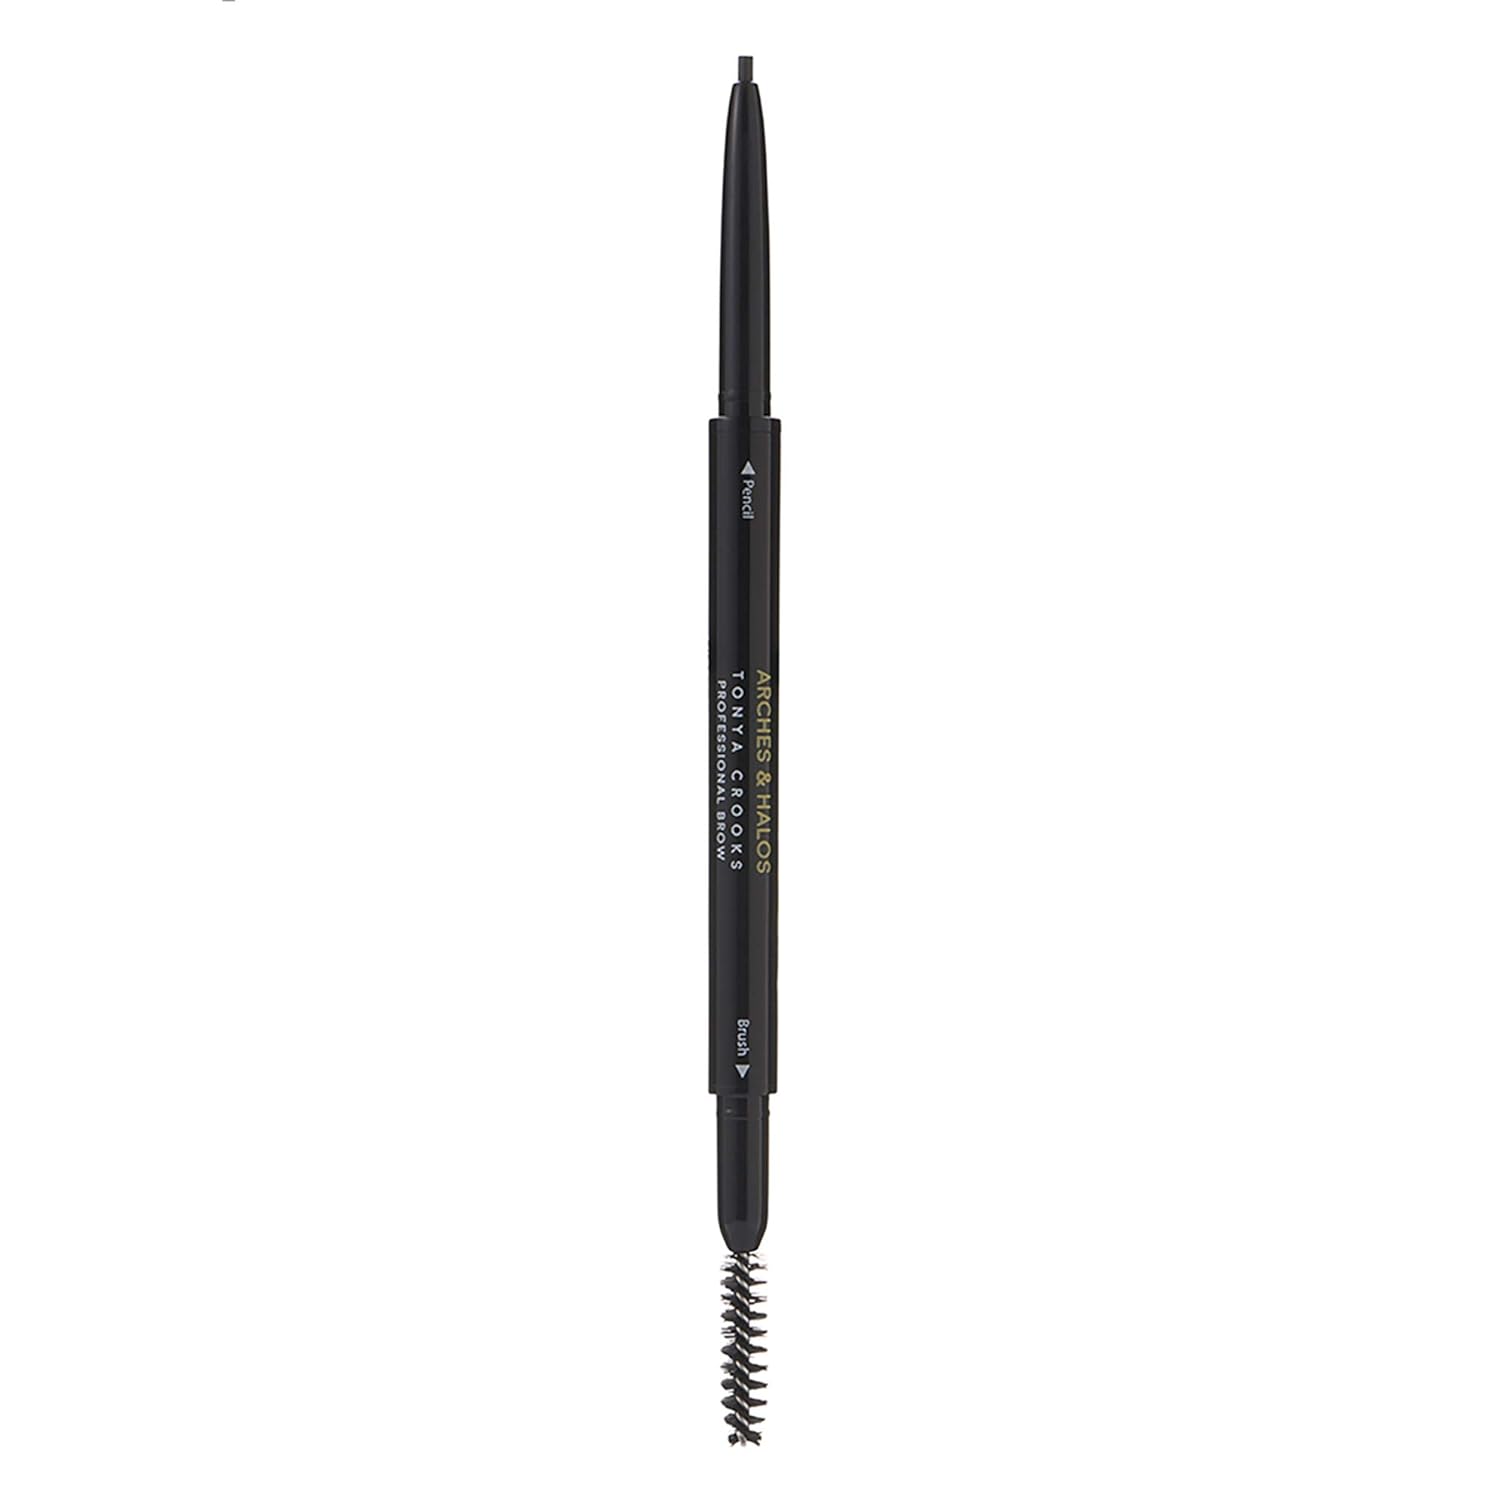 Arches & Halos Micro Defining Brow Pencil - For a Fuller and More Defined Brow, Long-Lasting, Smudge Proof, Rich Color - Dual Ended Pencil with Brush - Vegan and Cruelty Free Makeup - Charcoal, 0.003